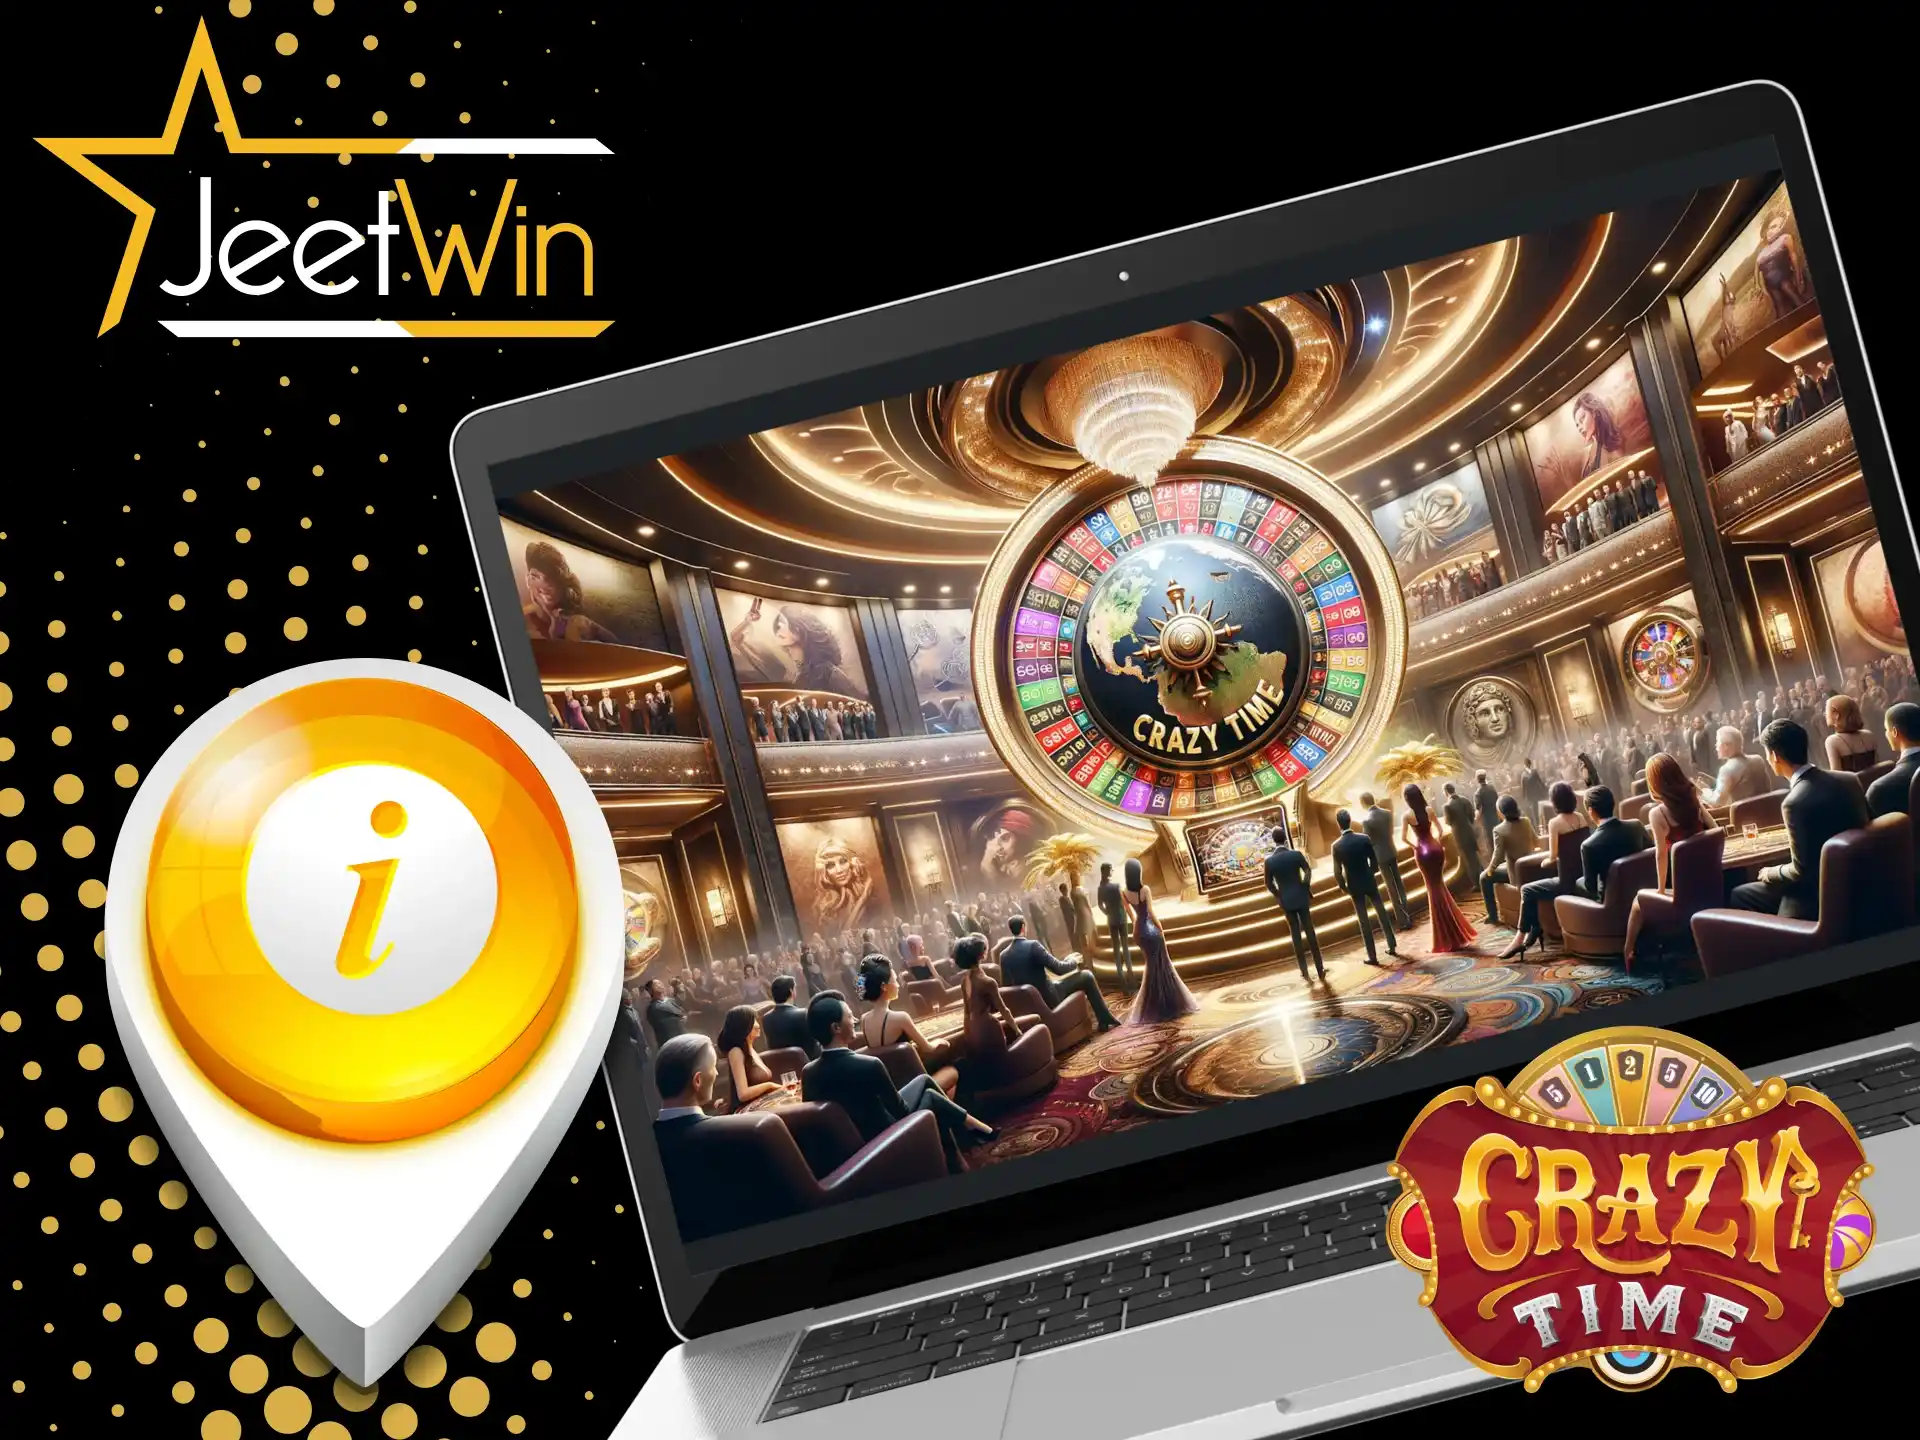 What is the main point of playing Crazy Time at JeetWin online casino.